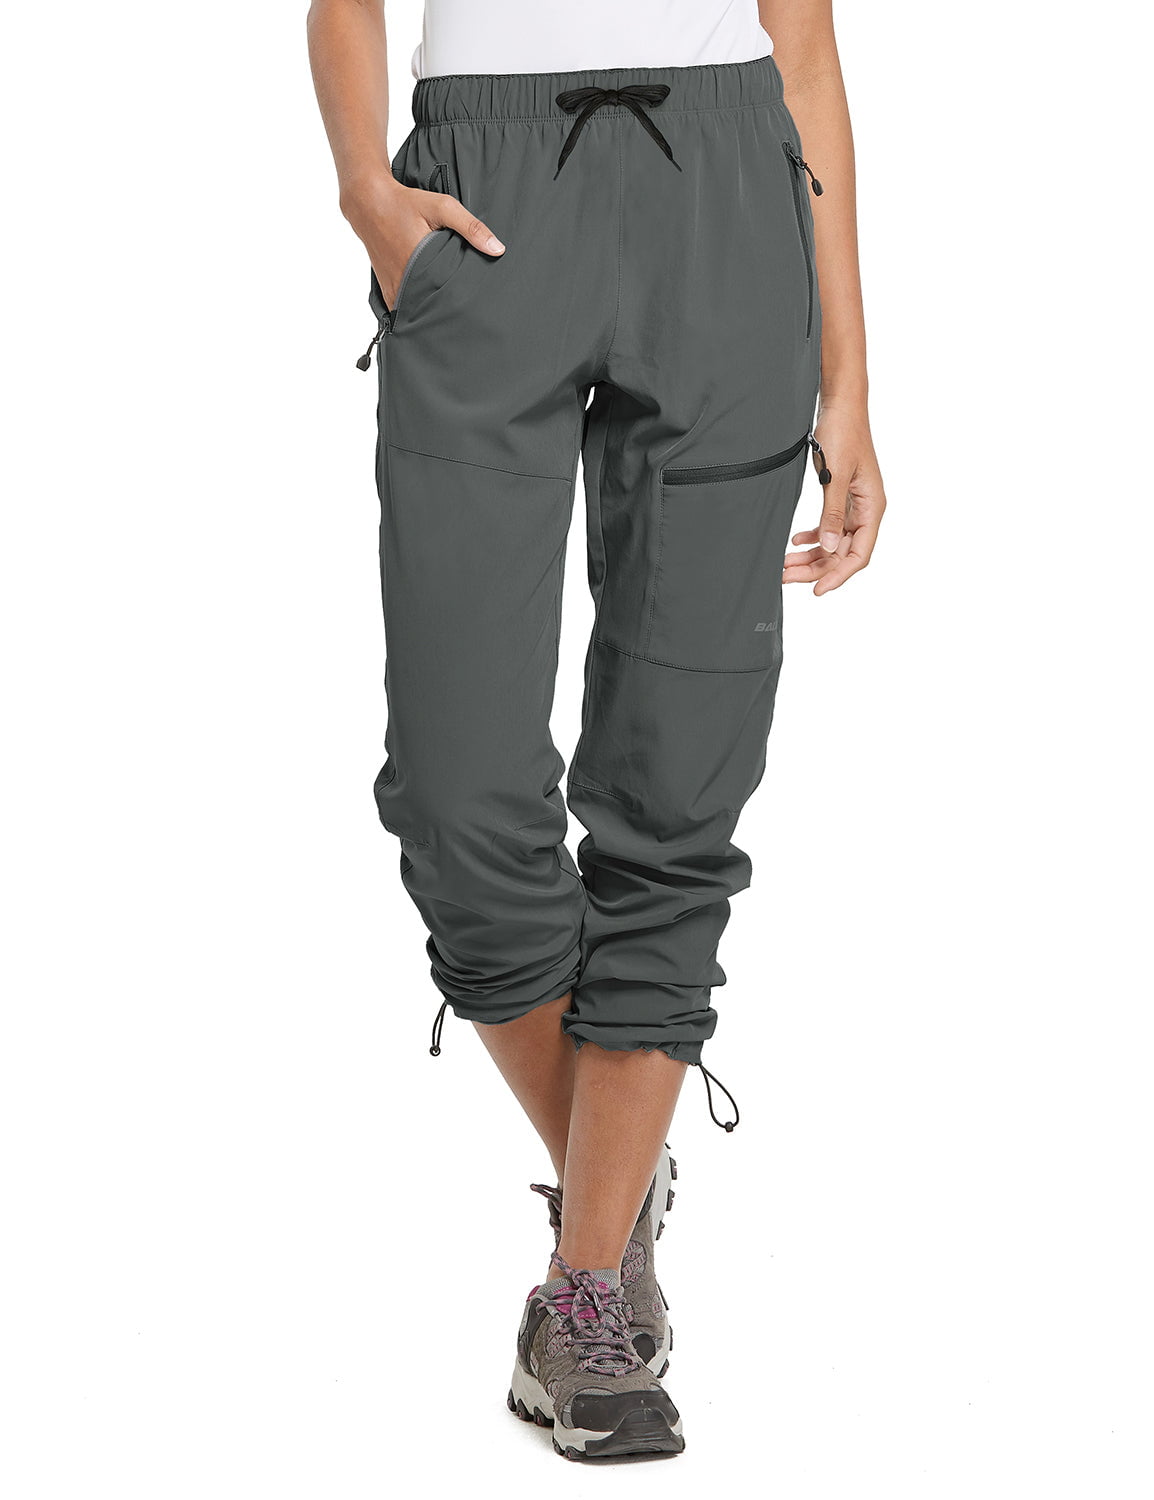 BALEAF Cargo Pants For Women Quick Dry Water Resistant With 4 Zip-Closure  Pockets Elastic Waist Deep Gray Size S 